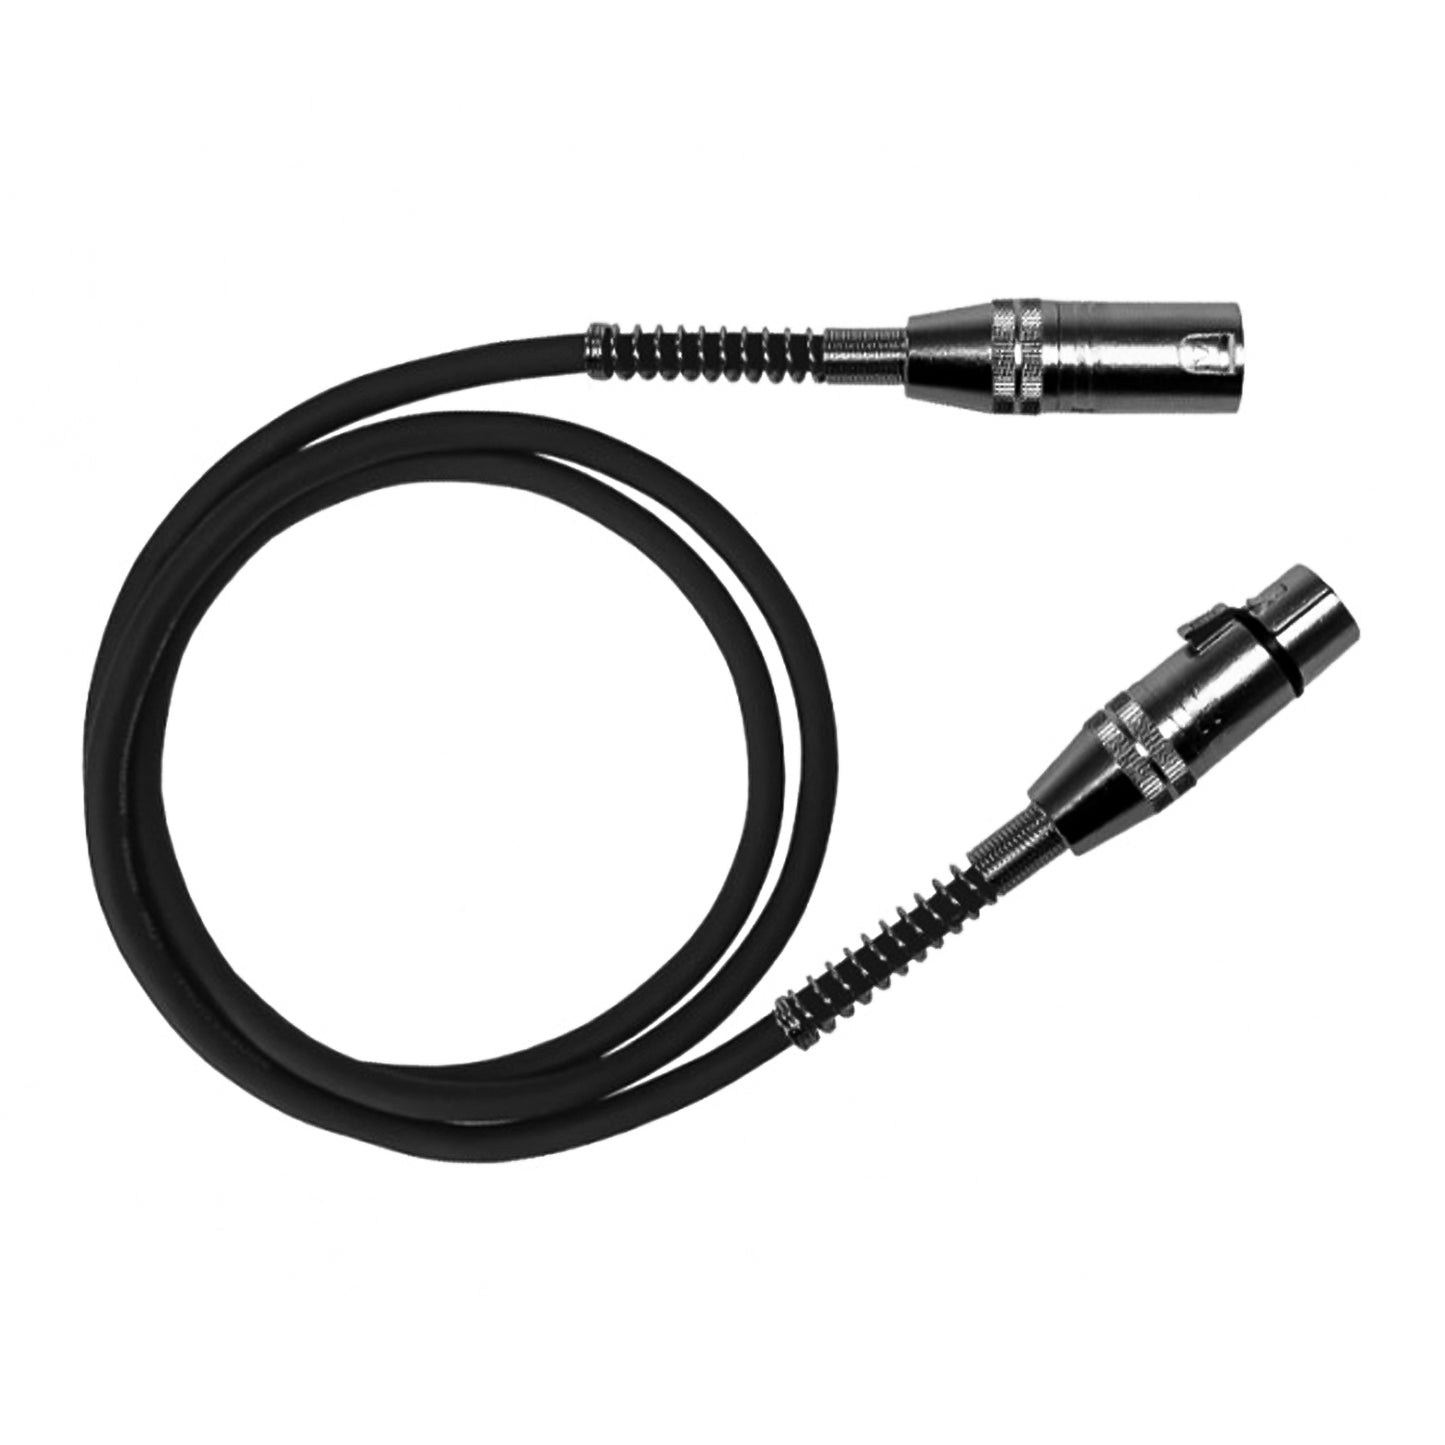 ZZIPP 1 Meter XLRM-XLRF Microphone Cable, Twist Protection Microphone Connector, Long Audio Cable